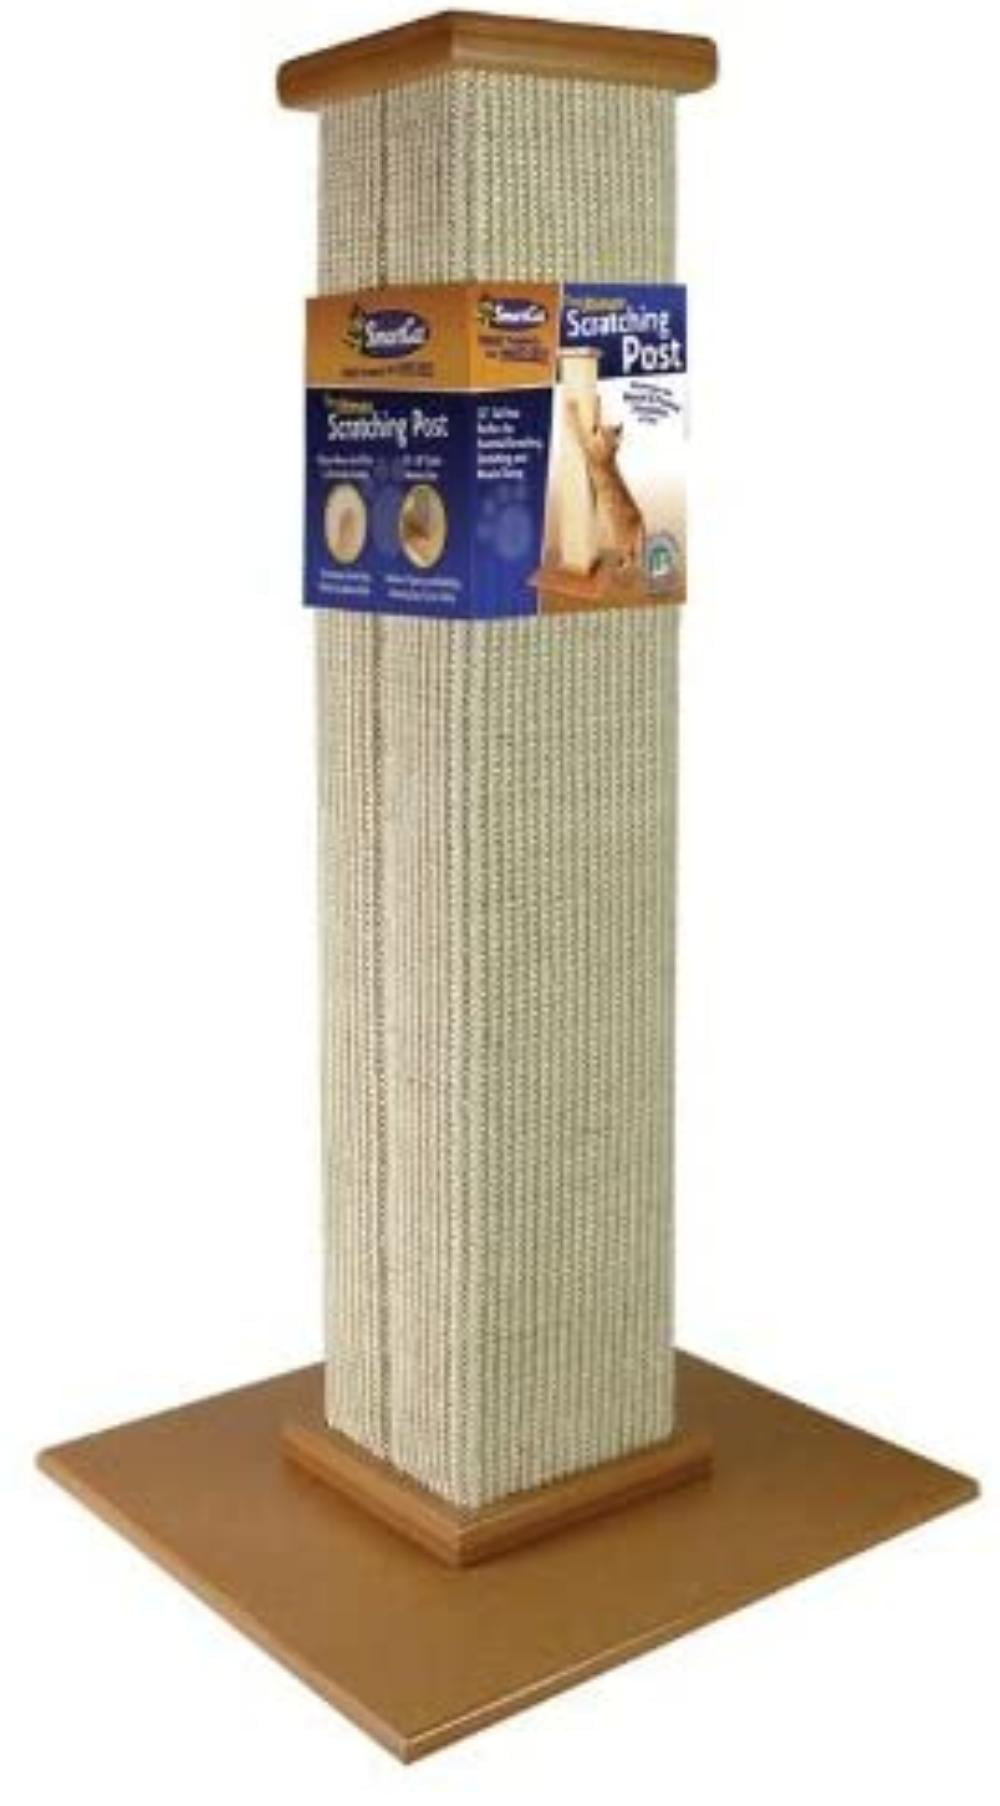 SmartCat Perch for the Ultimate Scratching Post